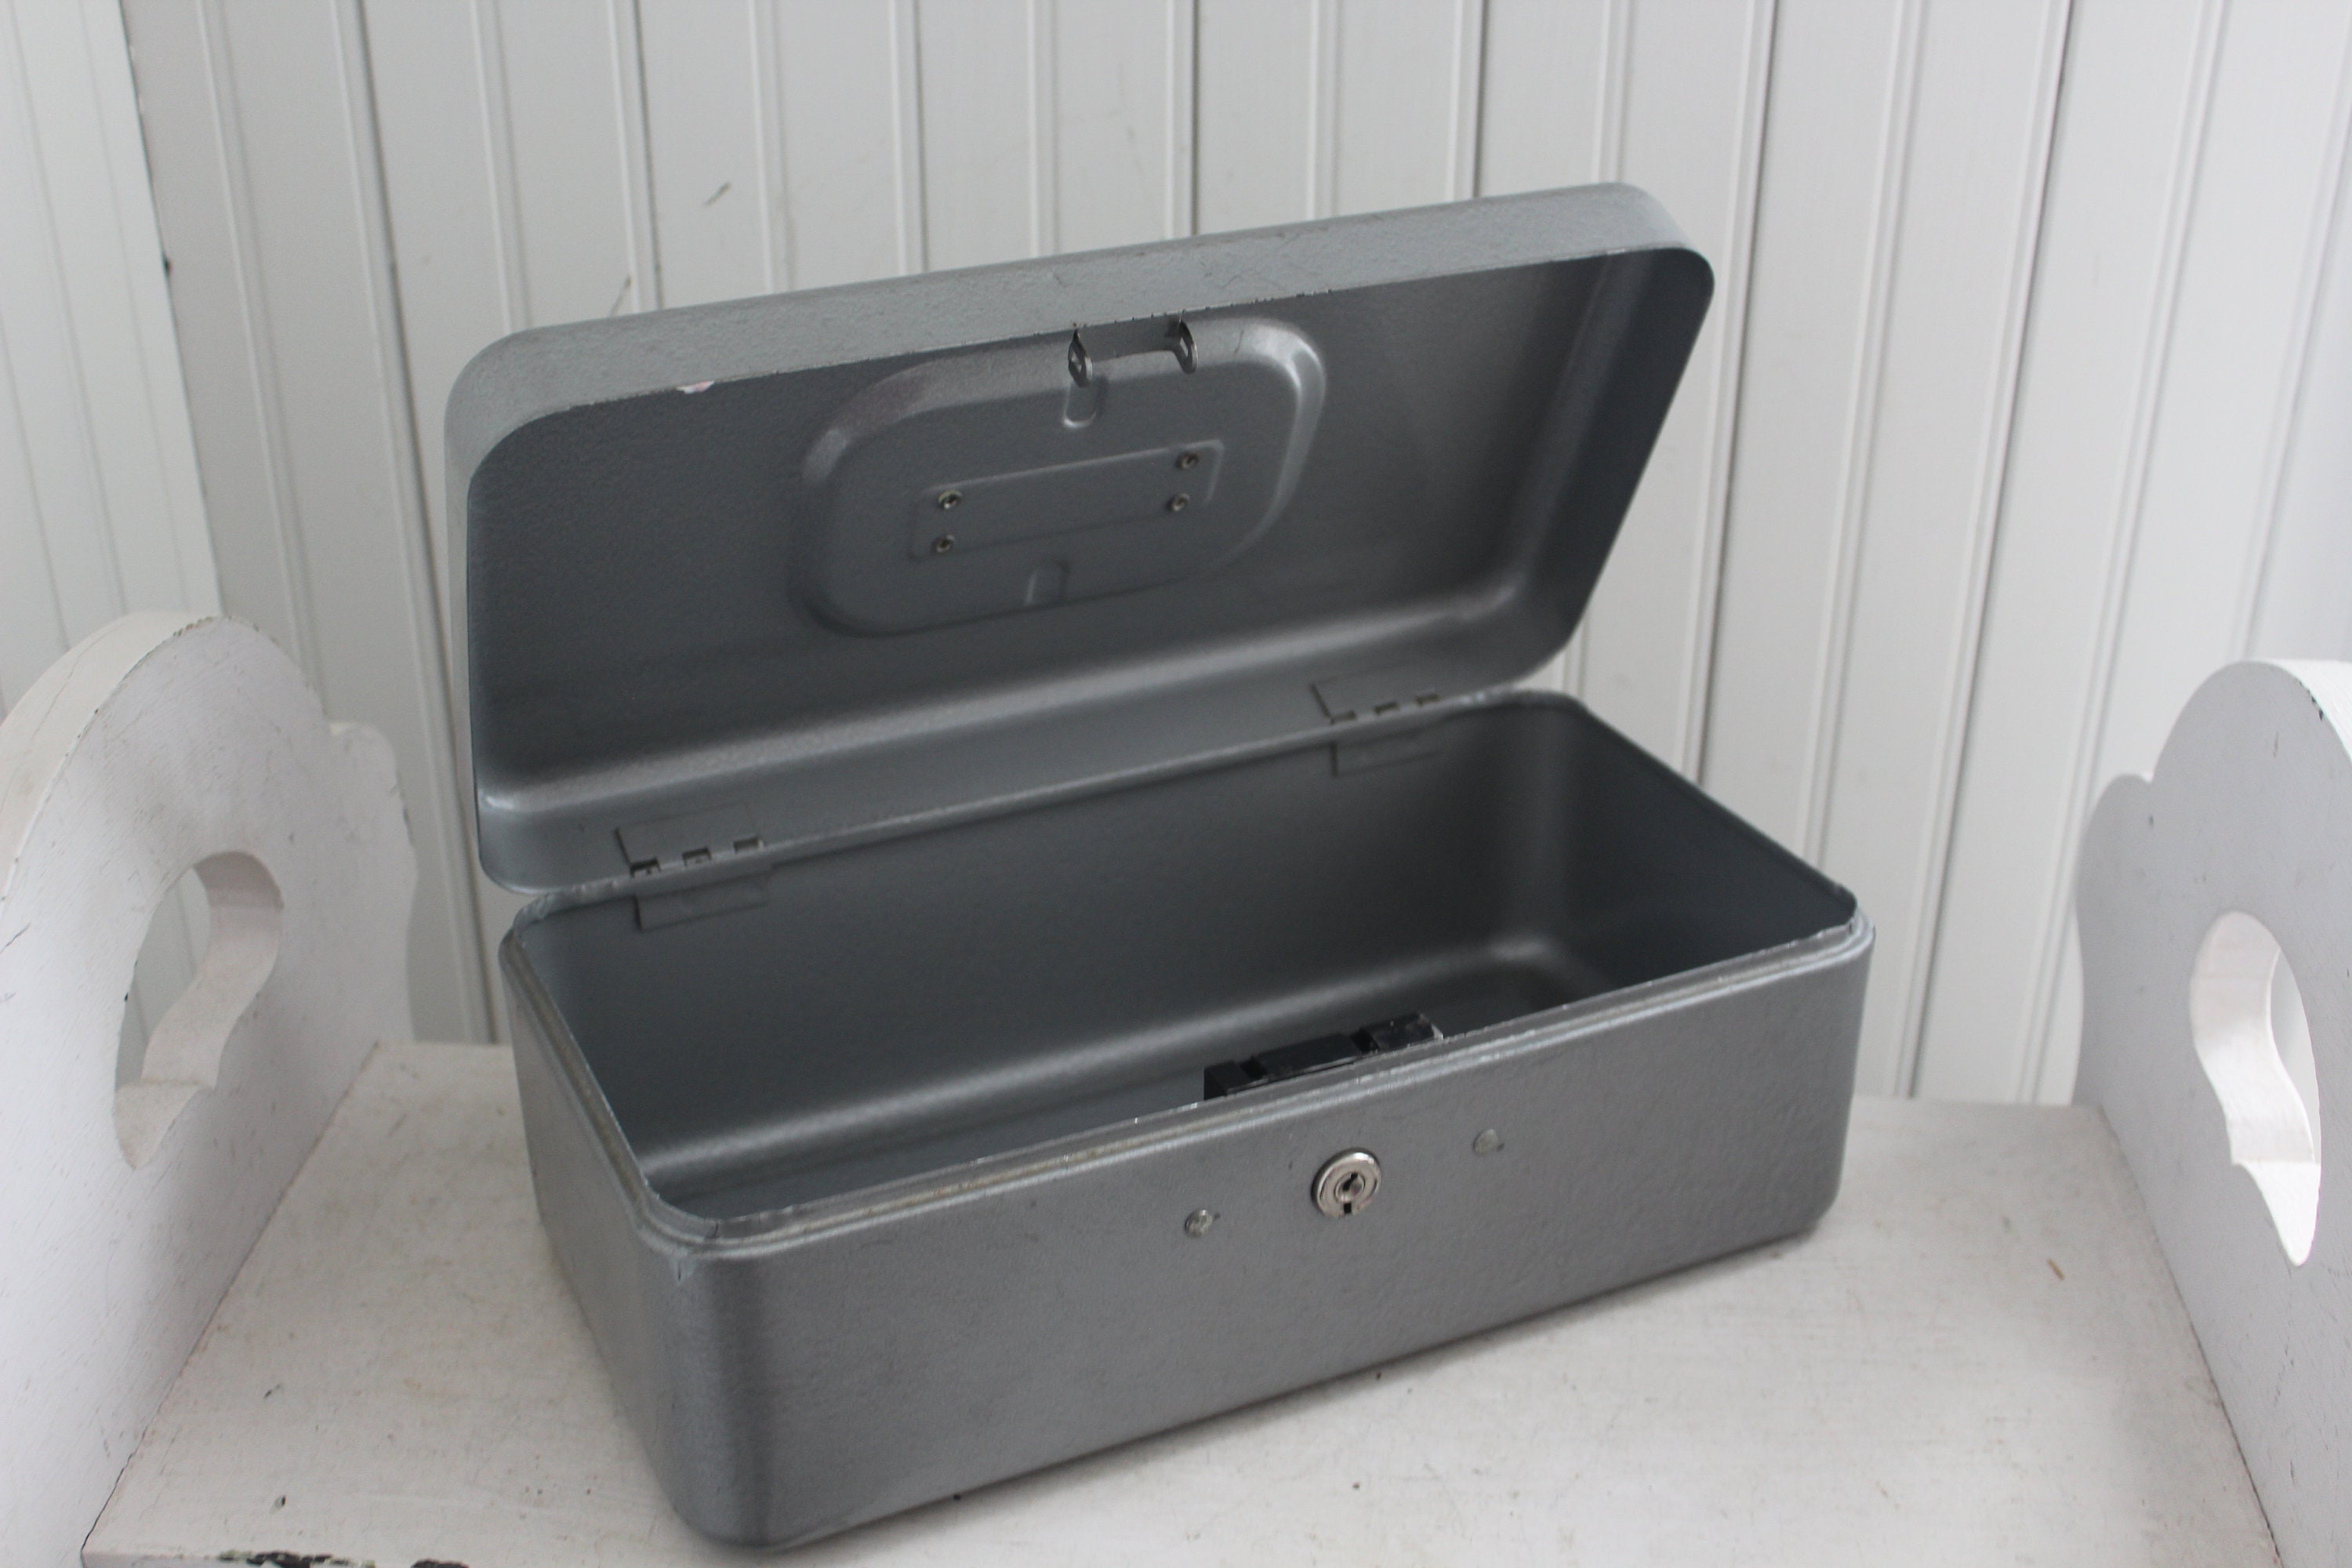 Vintage Metal Fishing Tackle or Tool Box Made by CCO Products Beautiful  Granite Color Metal Tackle or Tool Box 1950s Cabin/craft Storage -   Canada